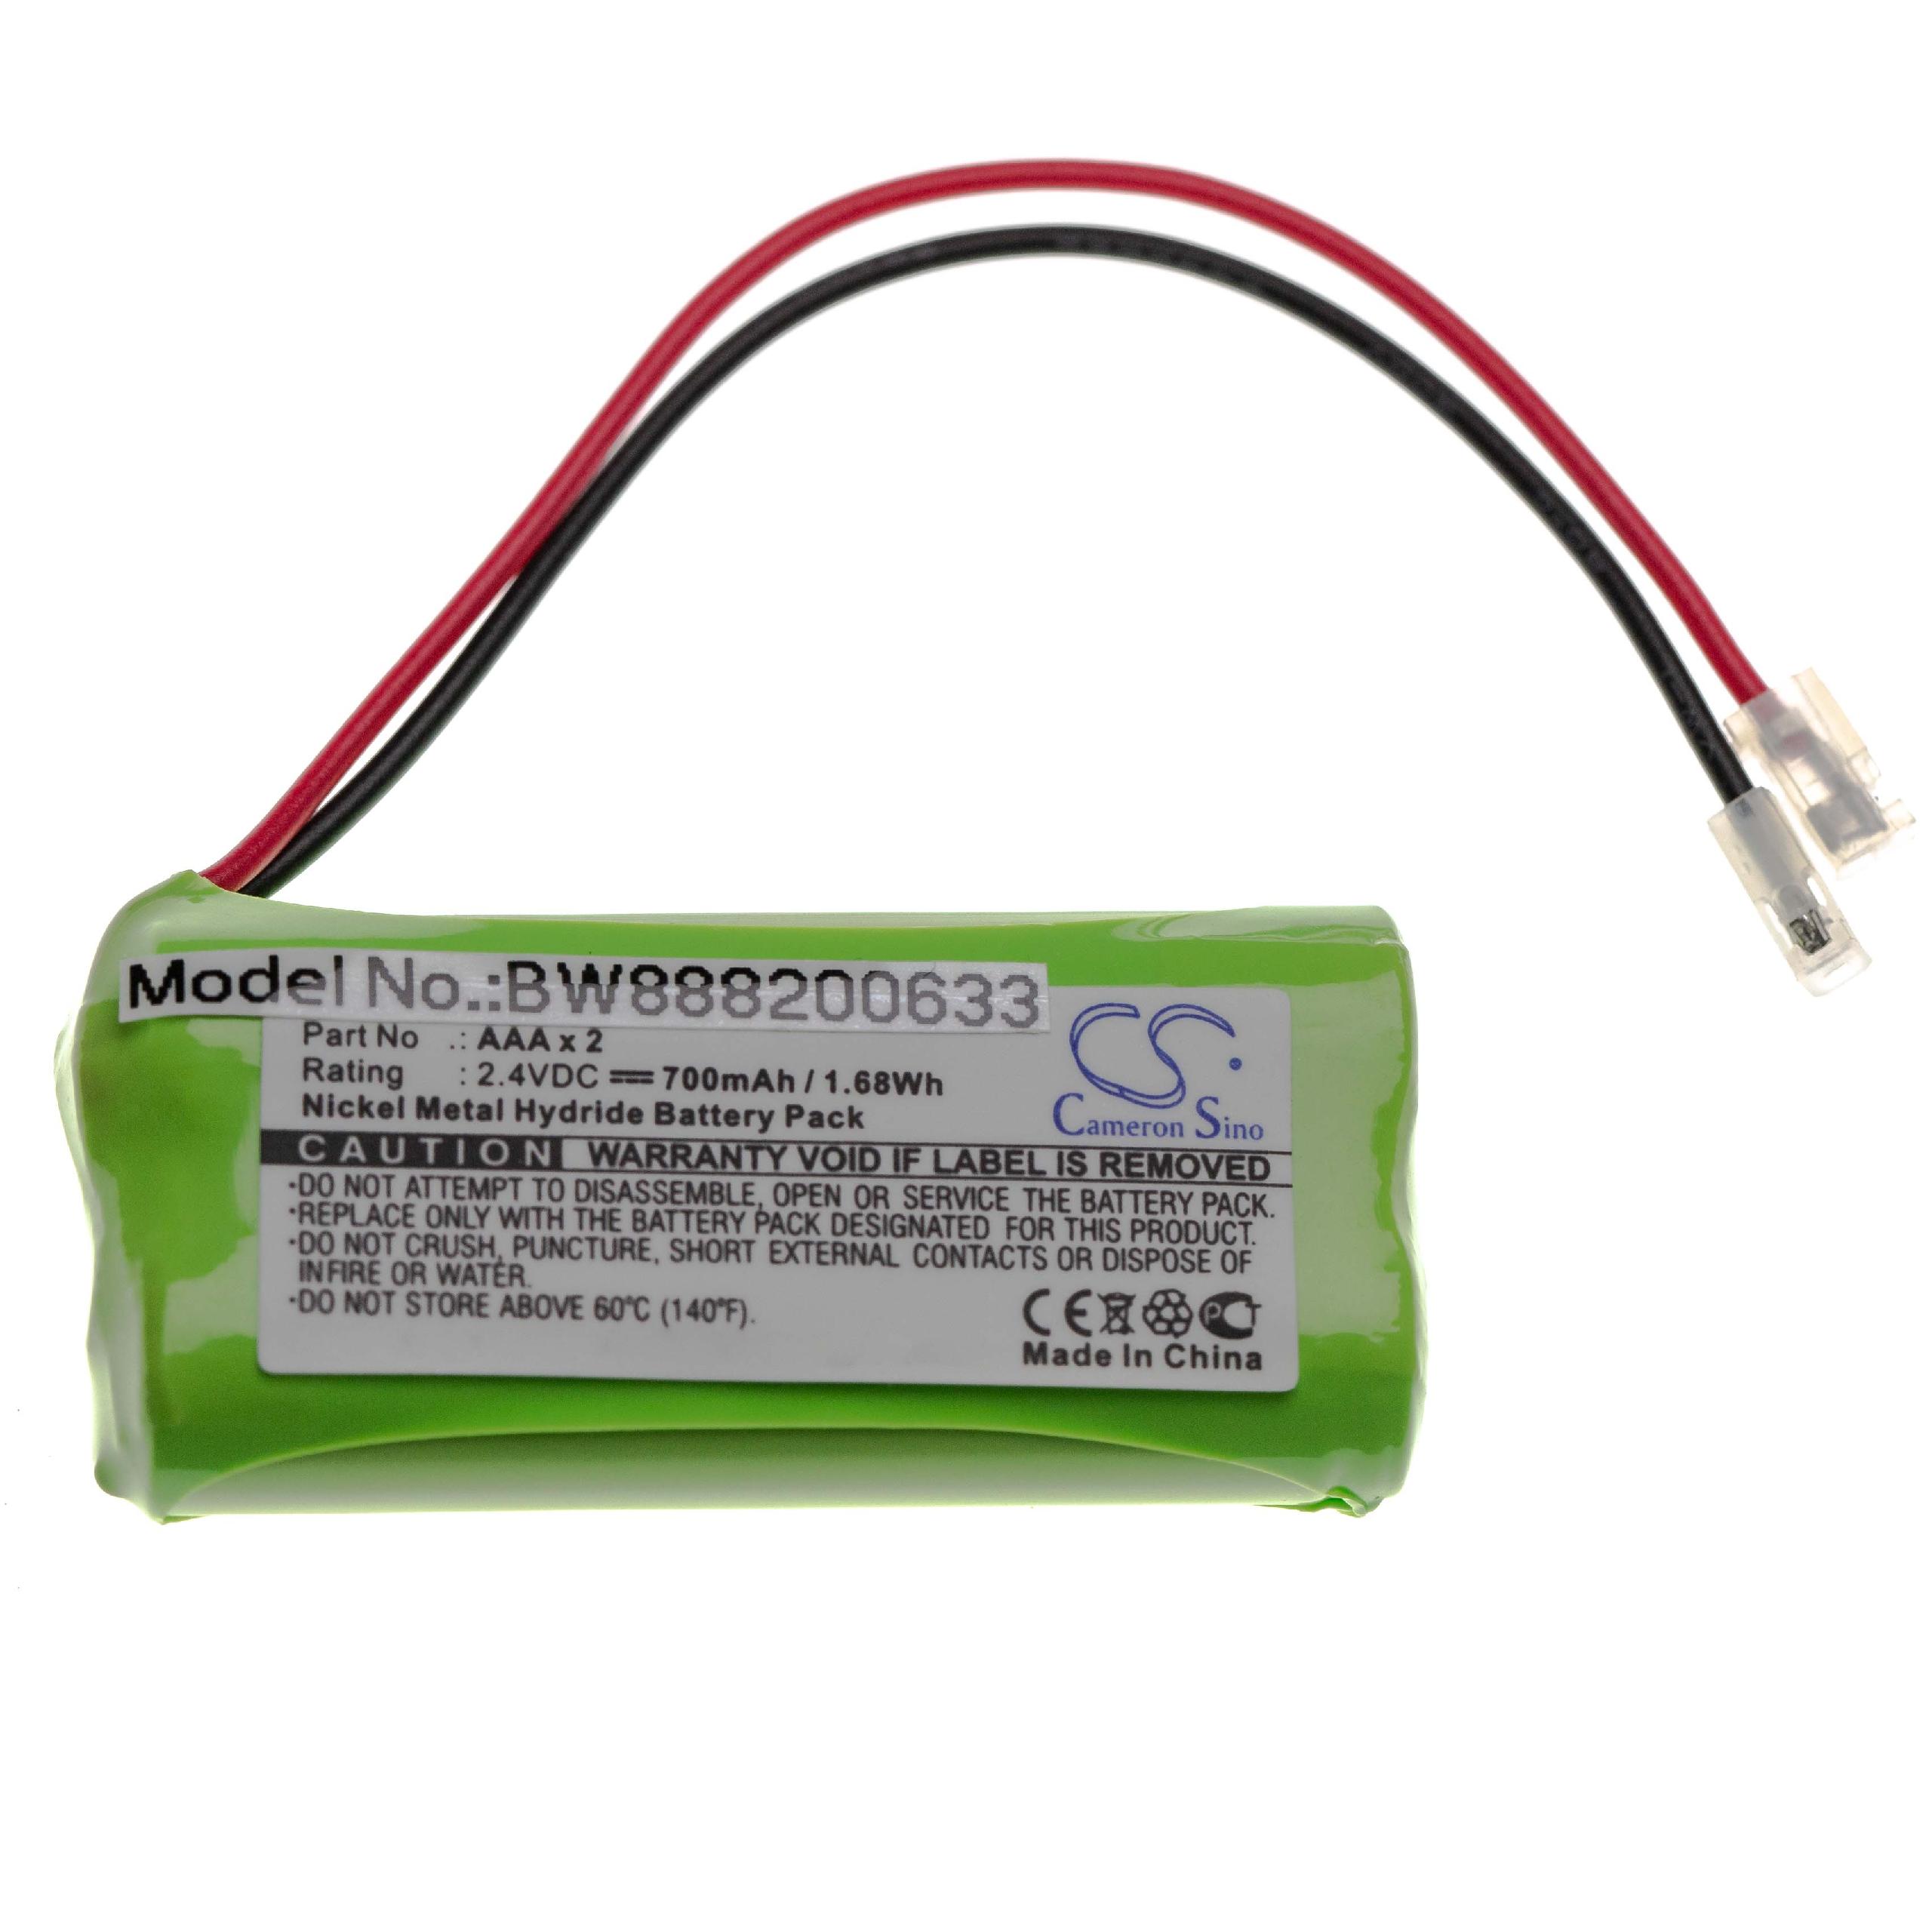 Universal Replacement Battery for various Devices - 700mAh 2.4V NiMH, Type AAA, Micro, HR03